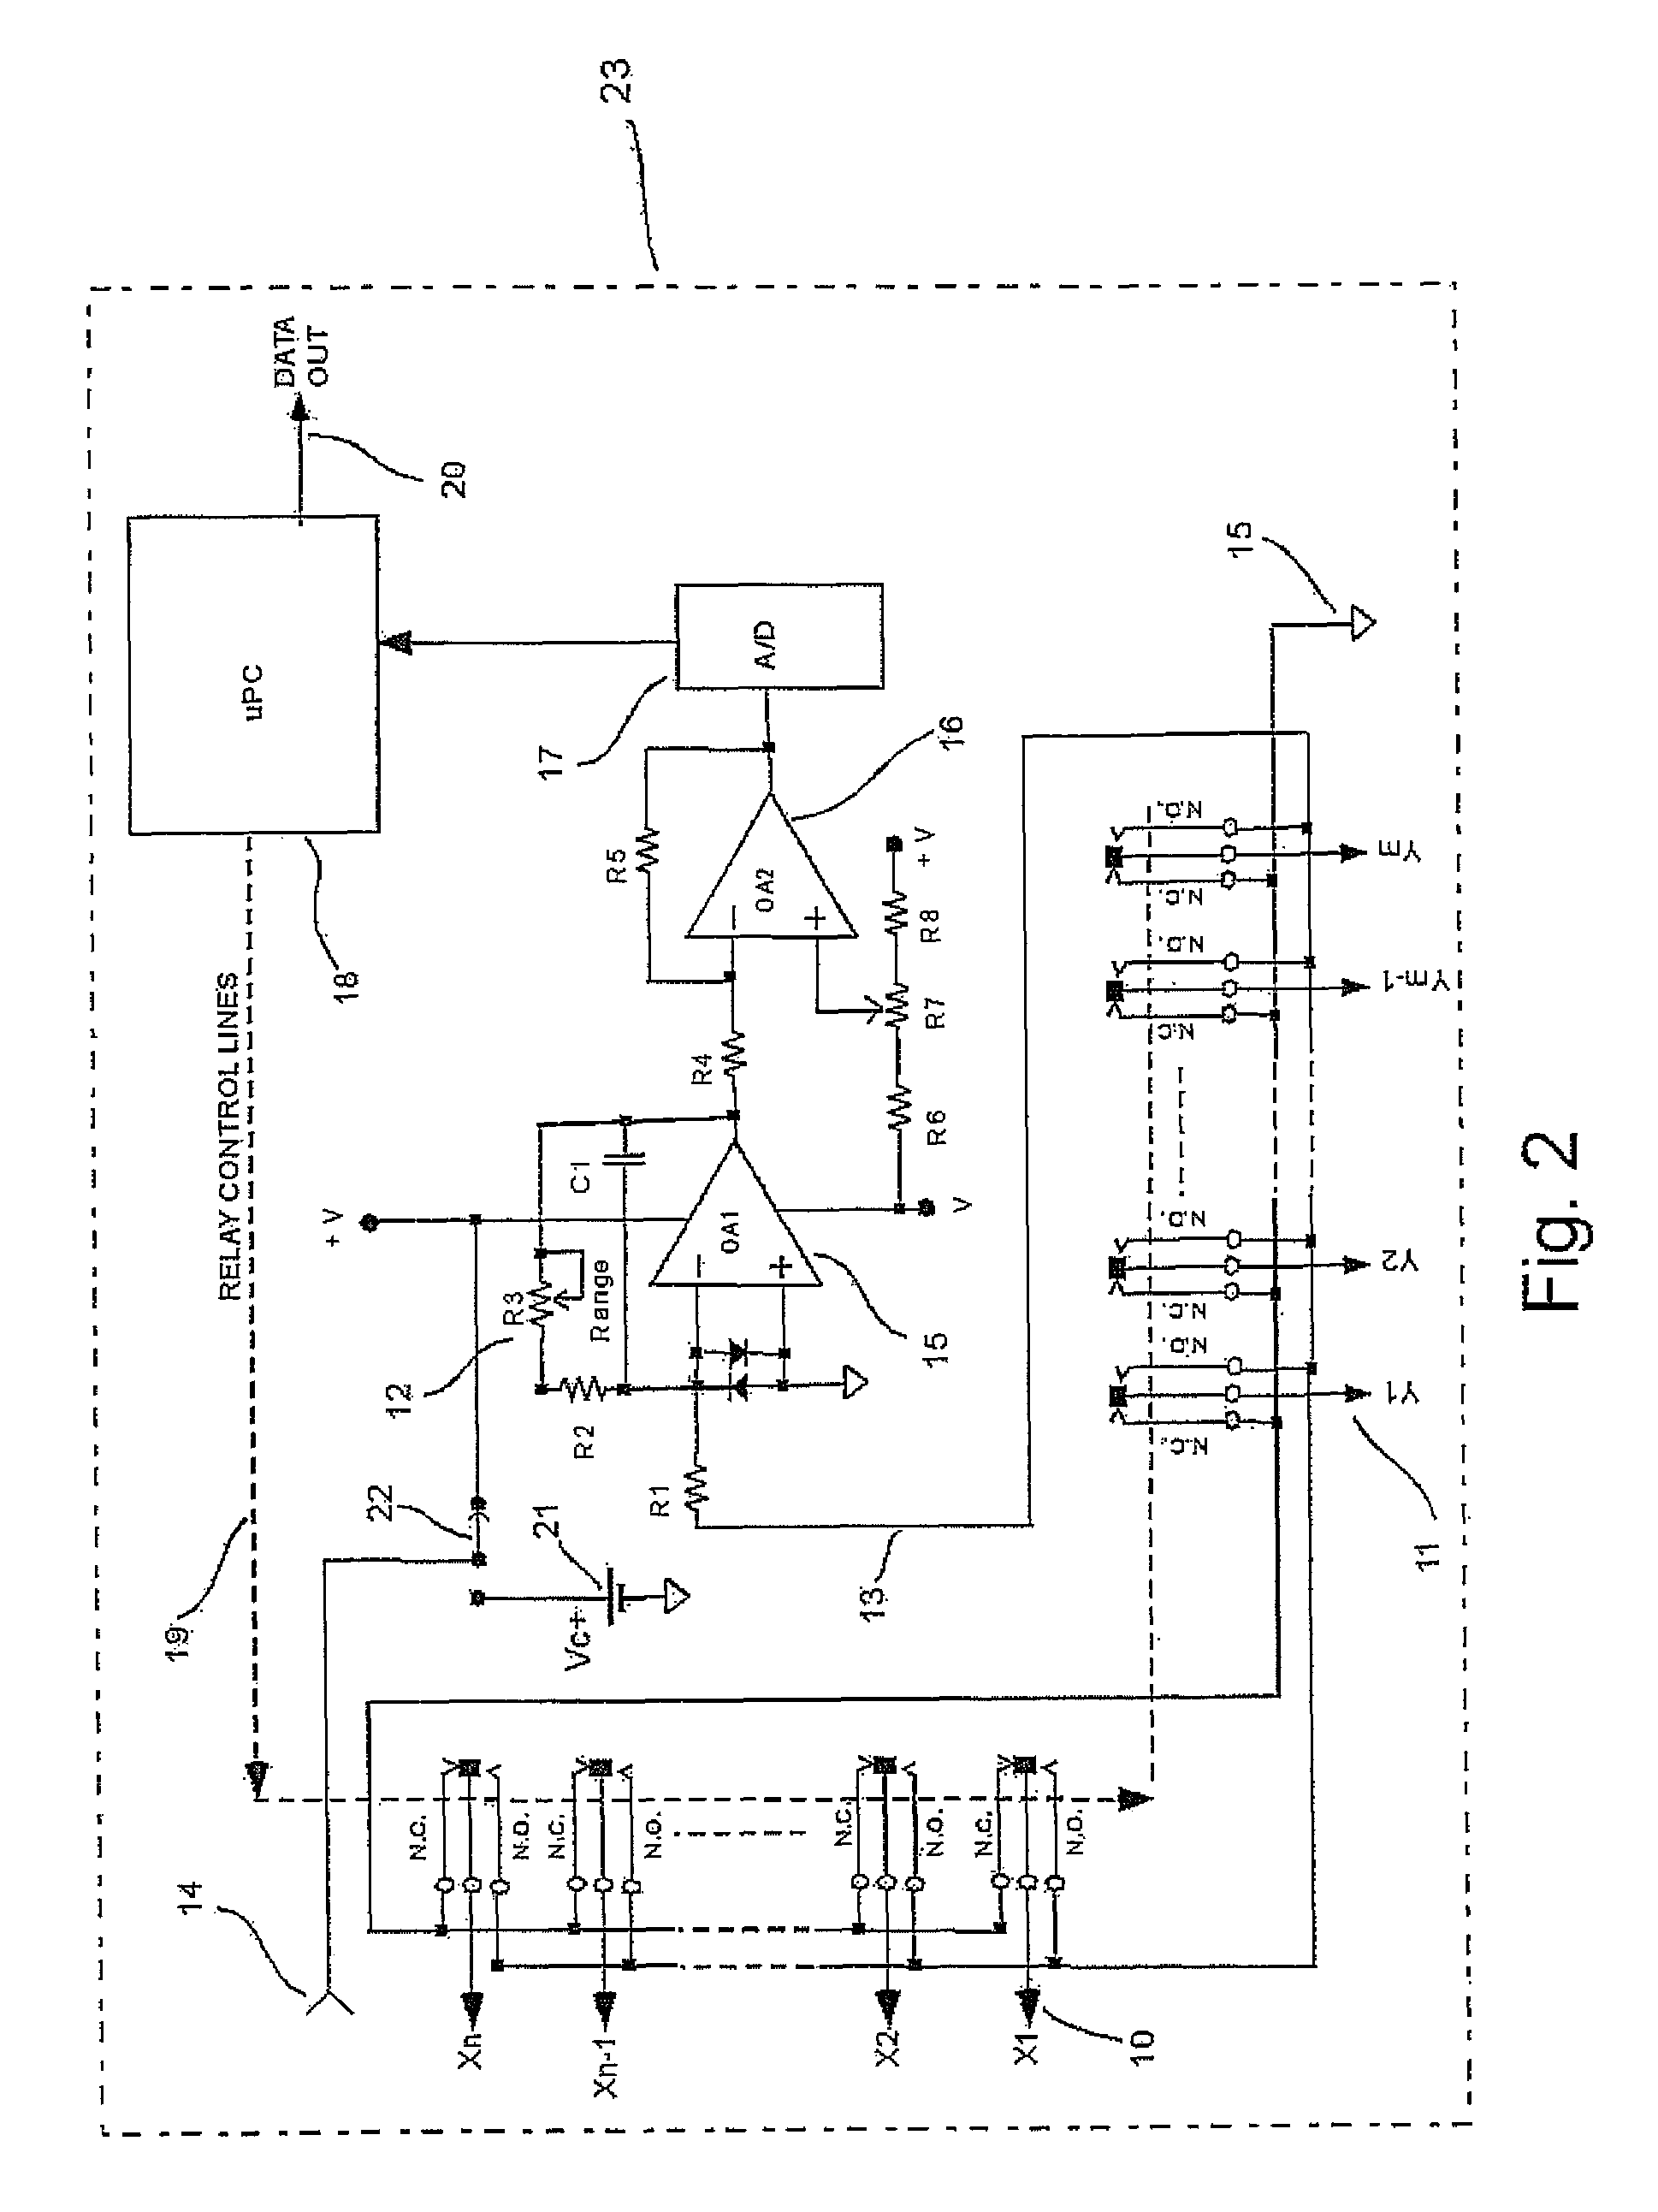 Method and apparatus to detect and locate roof leaks